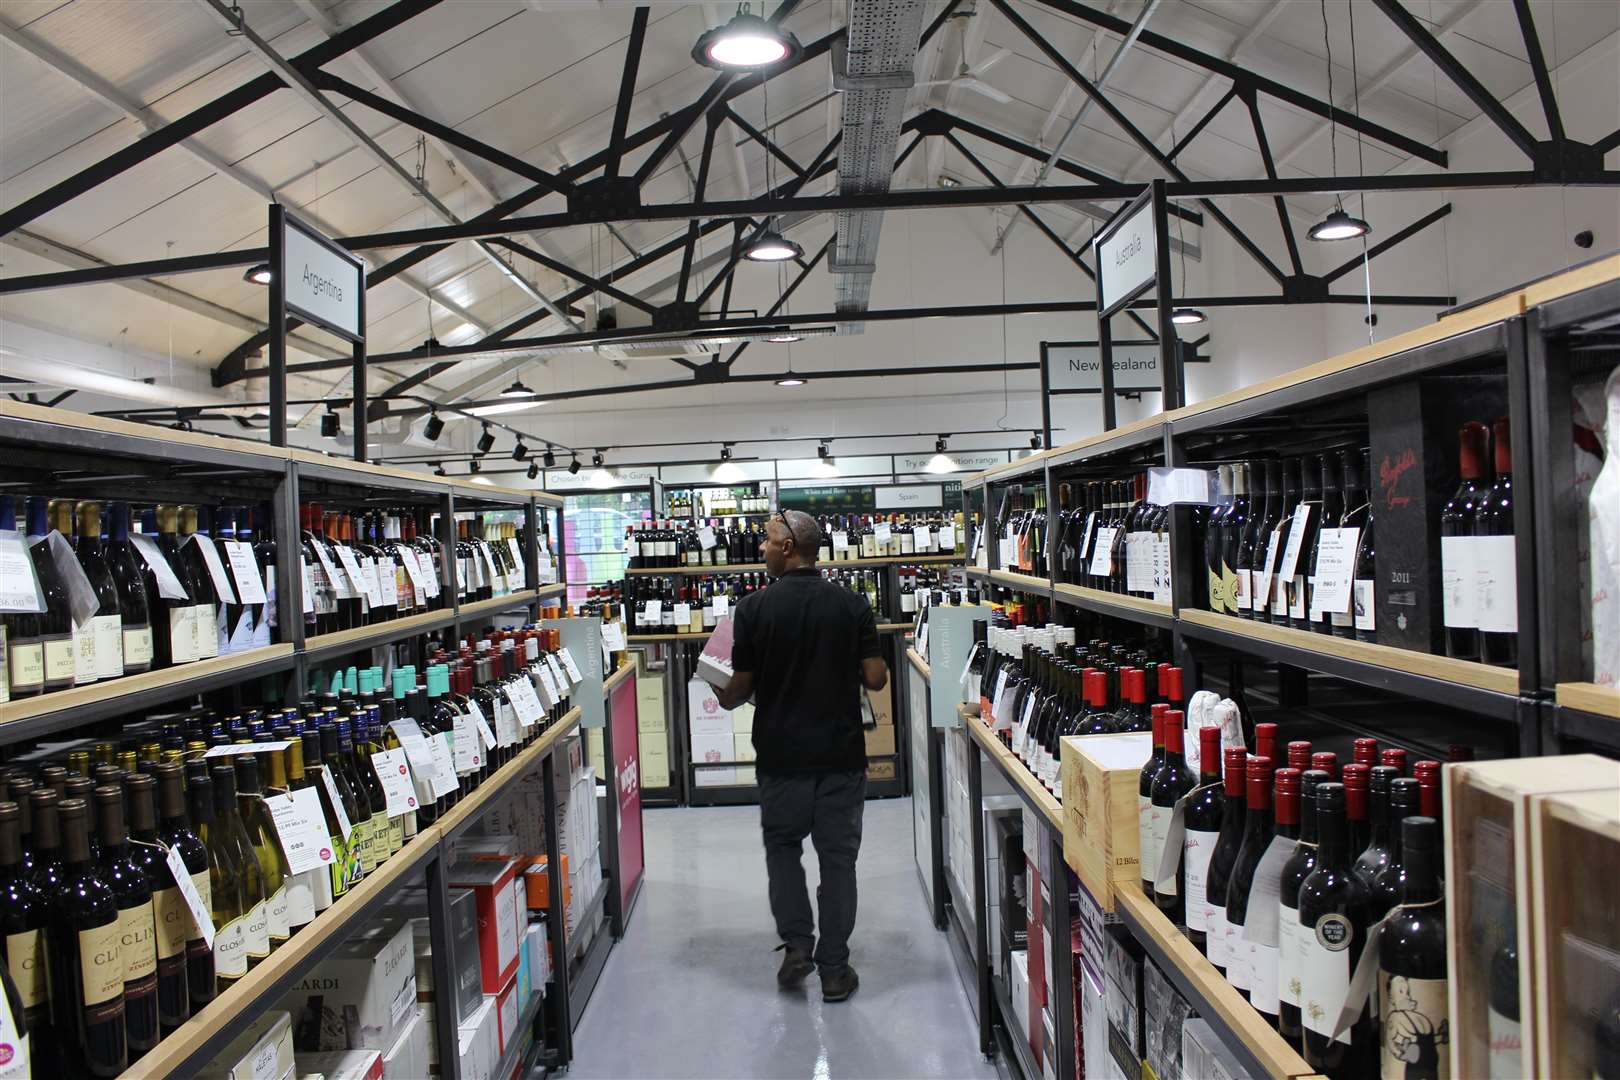 Majestic Wine has outlets in Canterbury and Tenterden